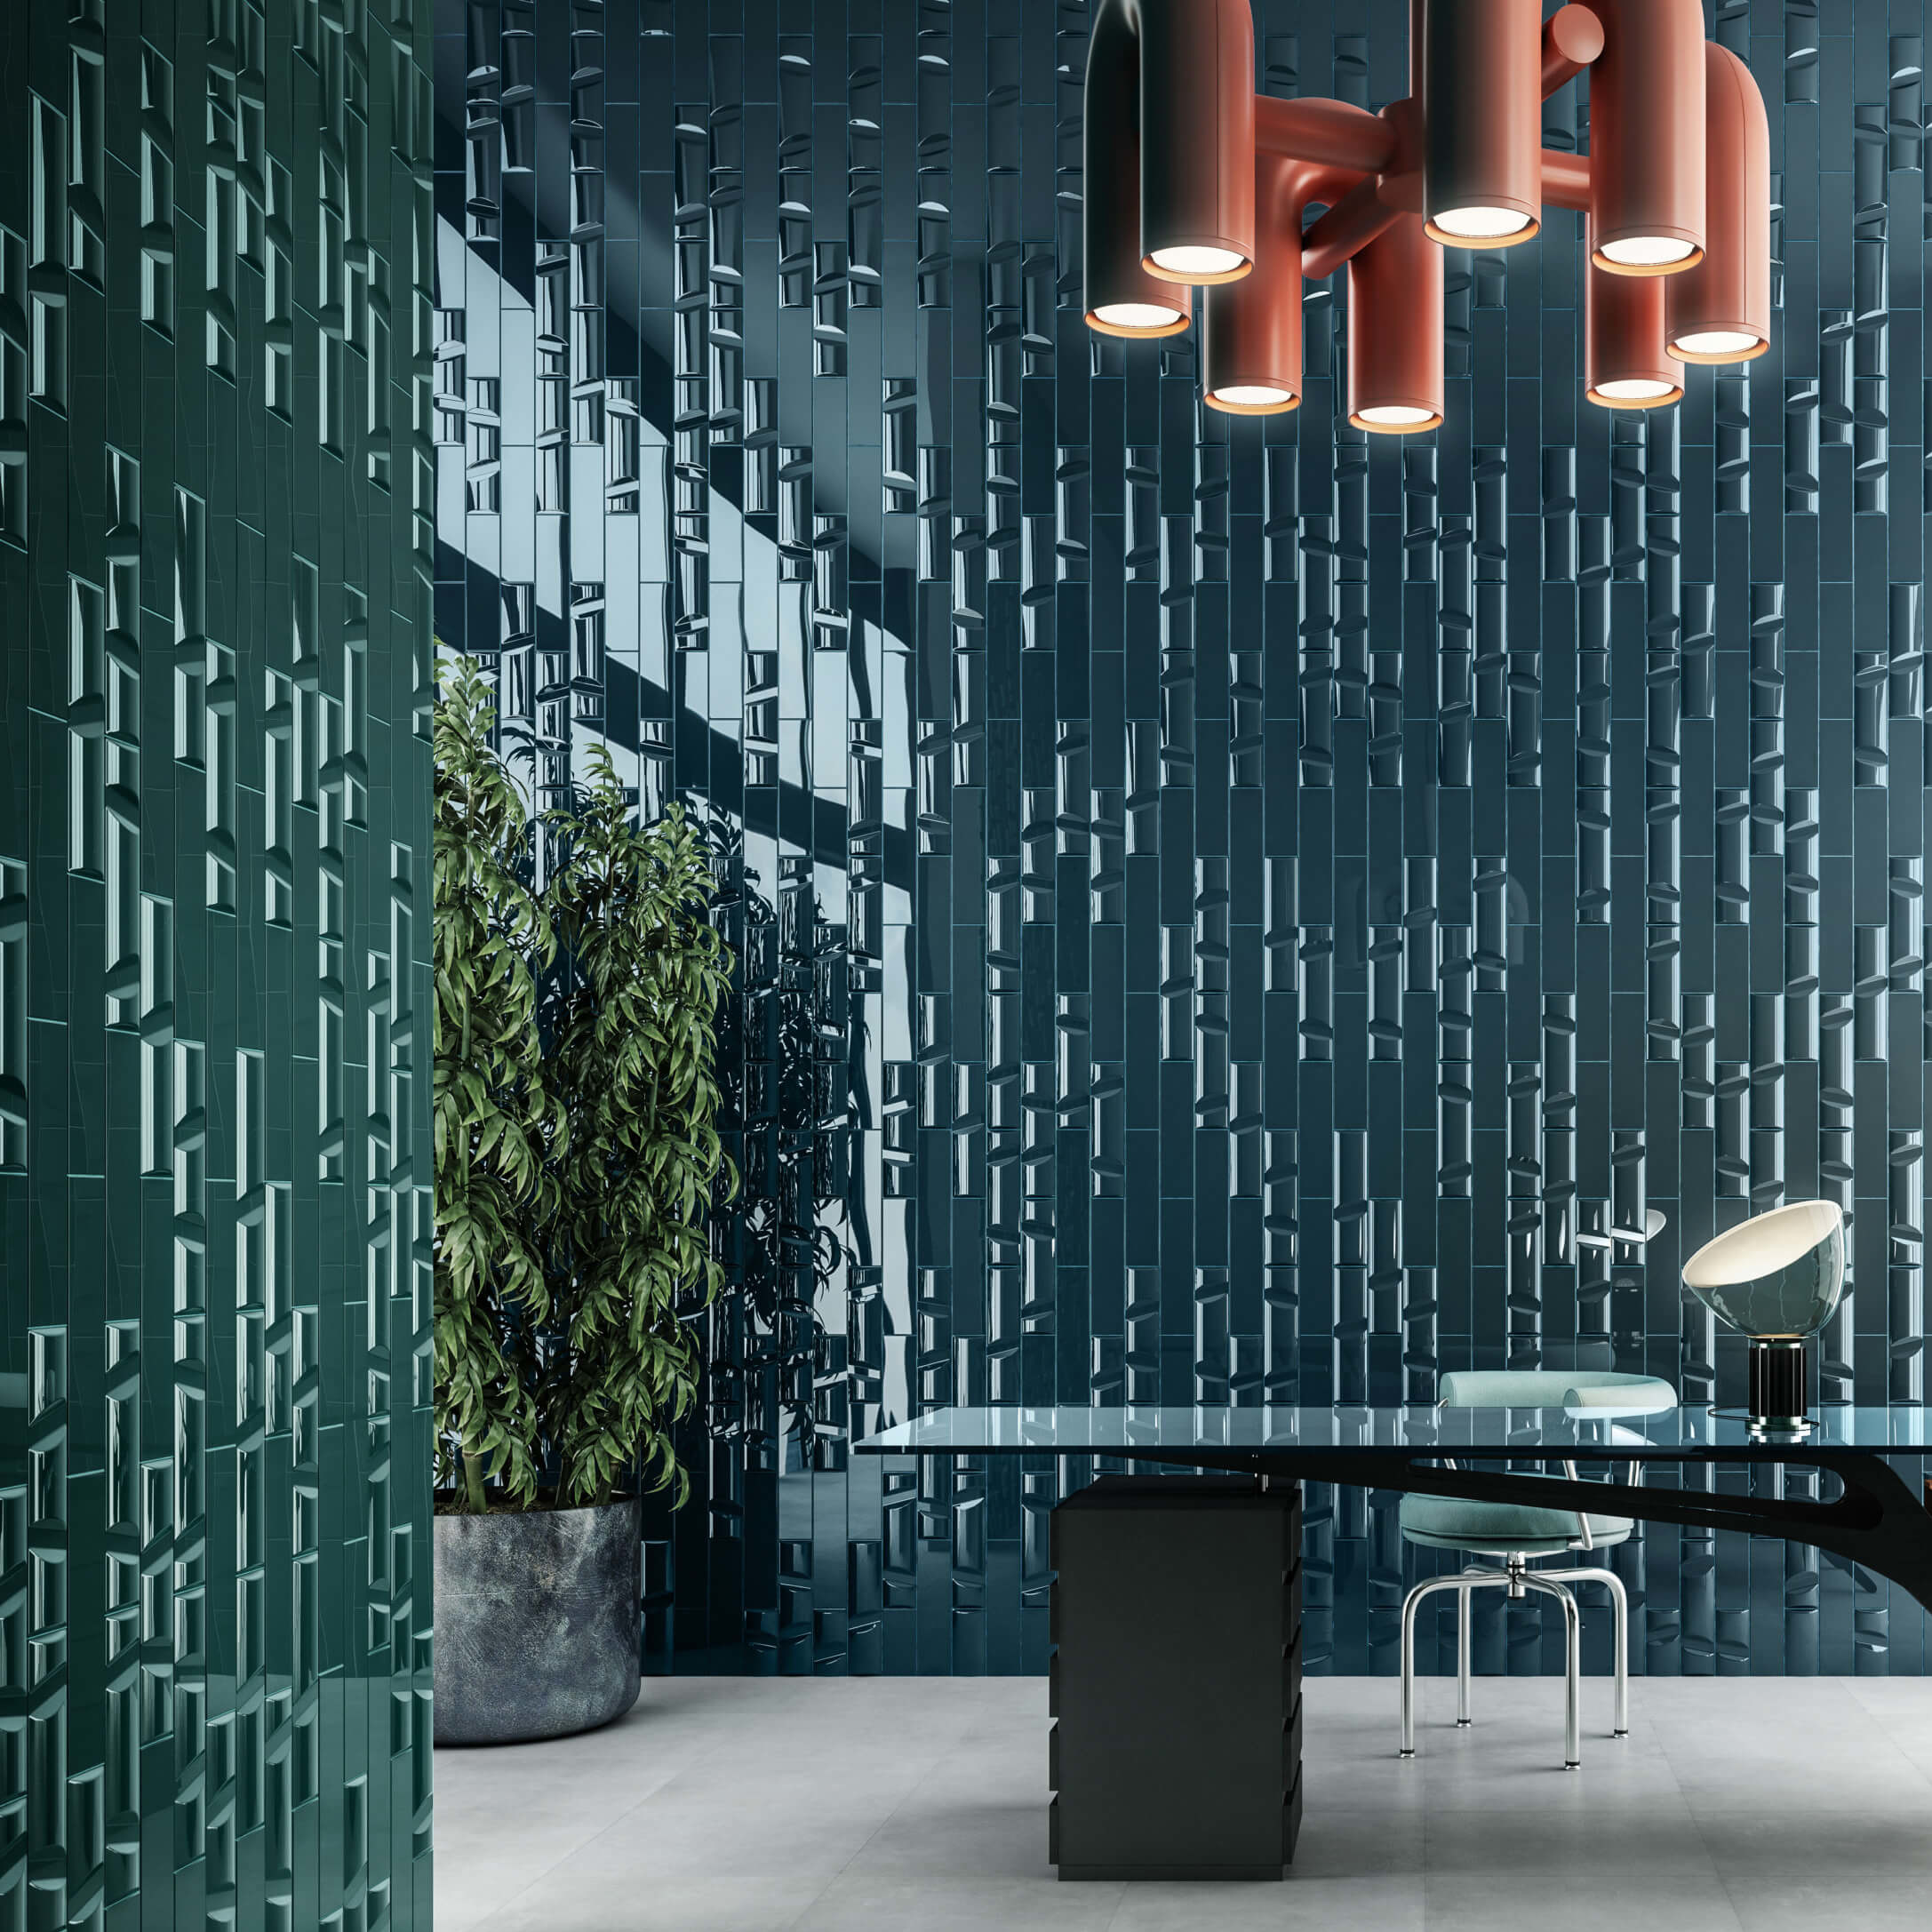 Lamps, a table, desk, a indoor plant within an interior clad in geometric tiles